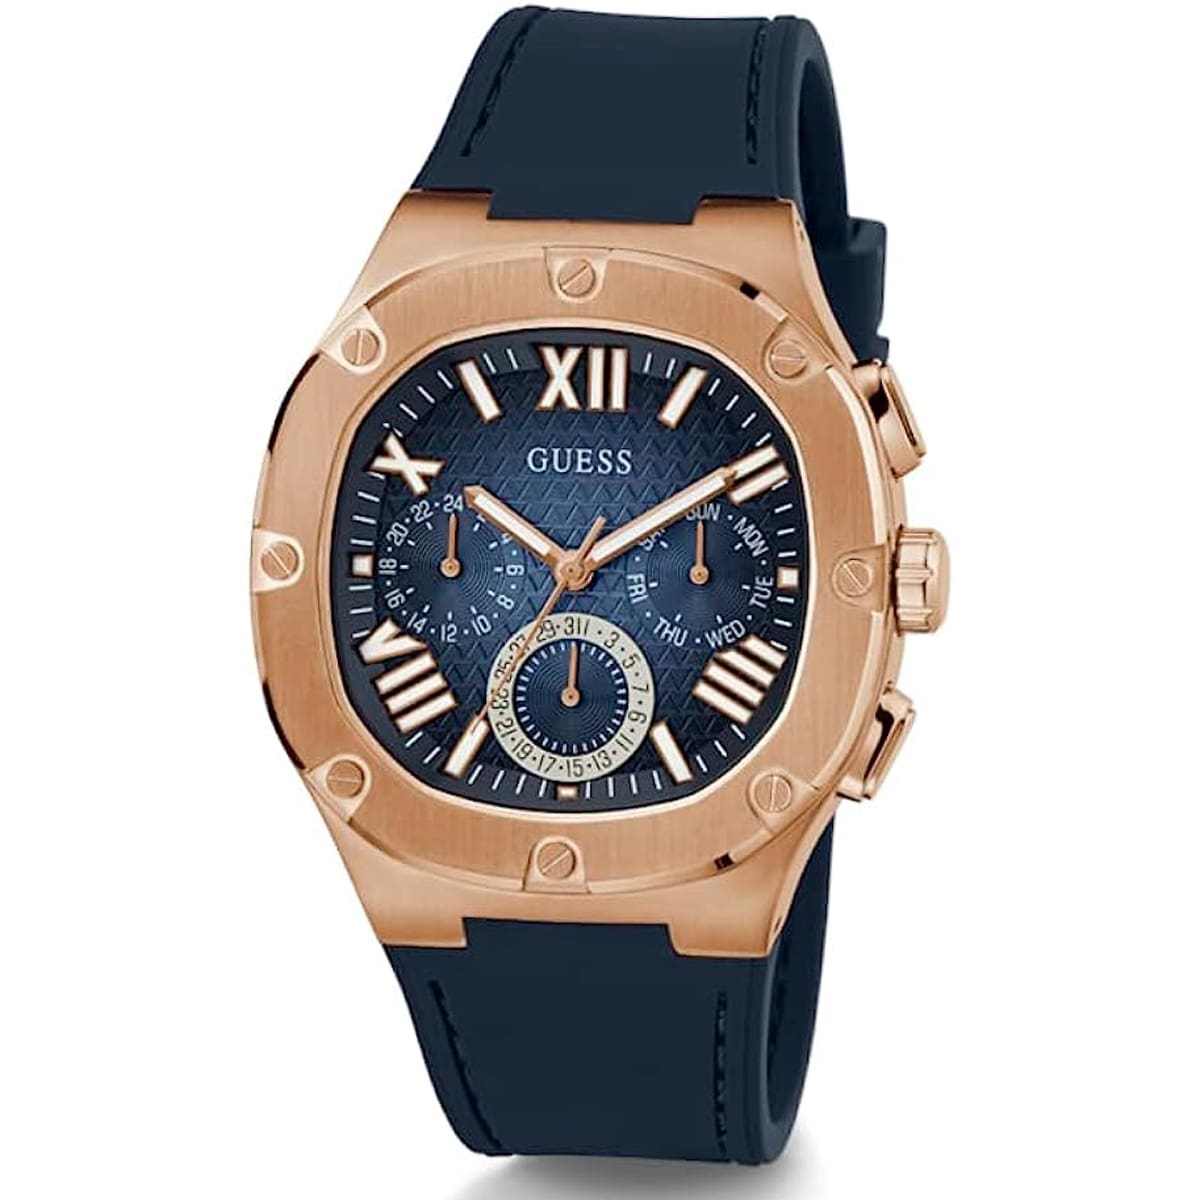 MONTRE GUESS HEADLINE HOMME M.FONCTION SILICONE